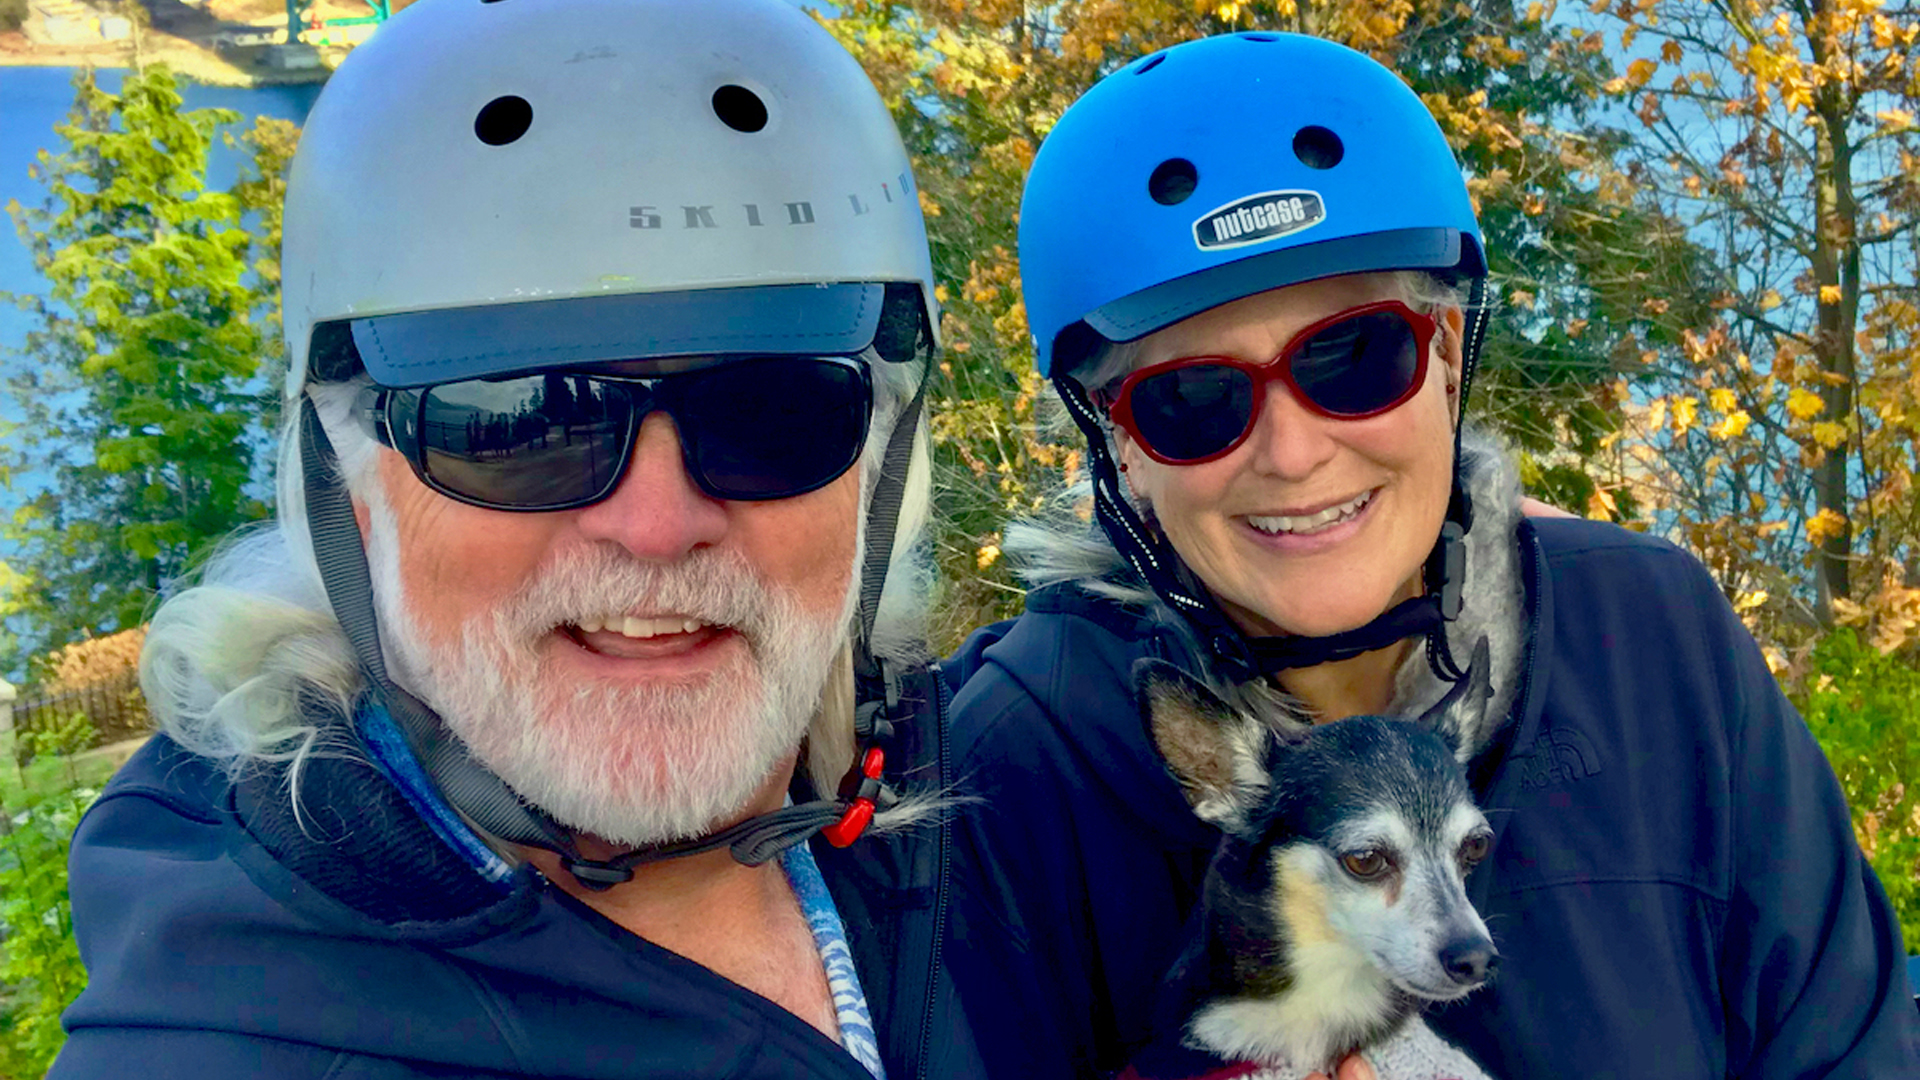 Jim and Carmen on another adventure with their dog while living full-time in their 2001 Airstream travel trailer.